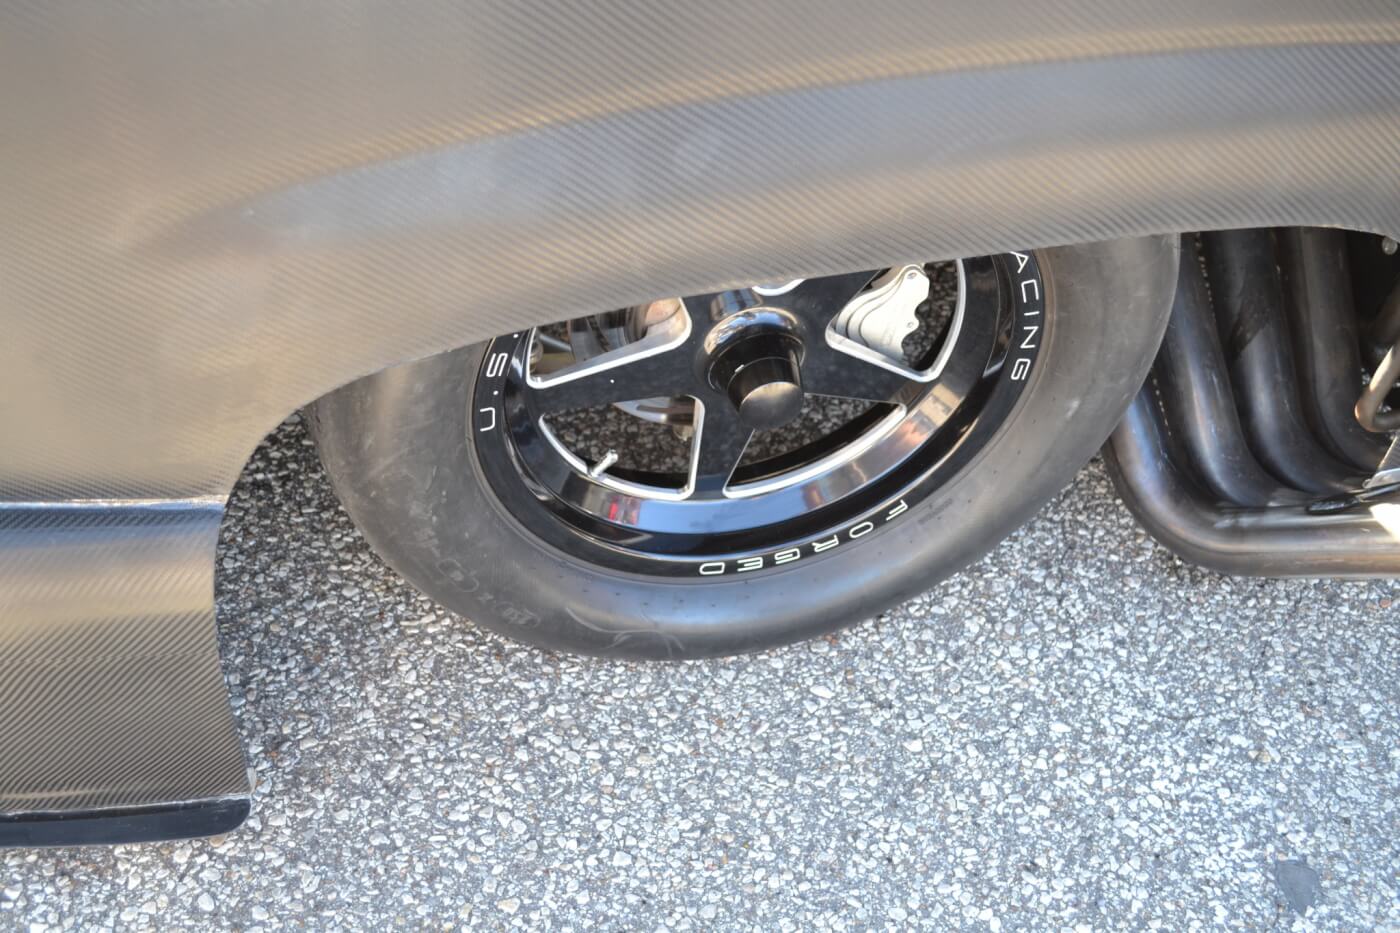 The front wheels are also from Weld, and are for drag racing purposes only. The spindle-mount wheels weigh an incredibly light 9.5 lbs. and cut down on both rotational weight and rolling resistance with the skinny drag tires.